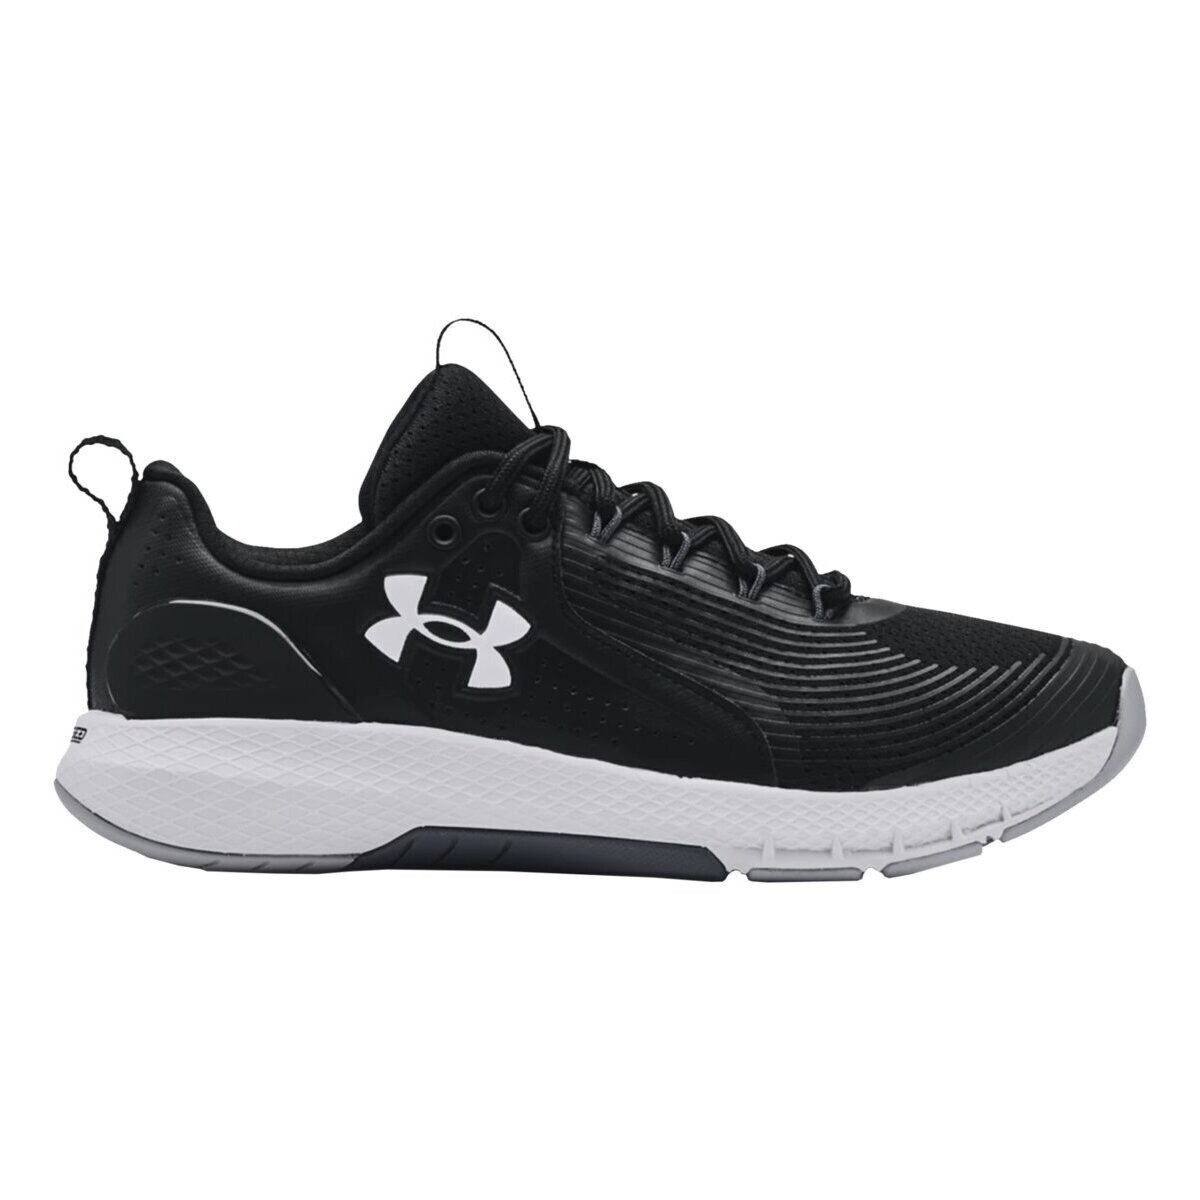 Chaussures Homme Fitness / Training Under Armour  Noir